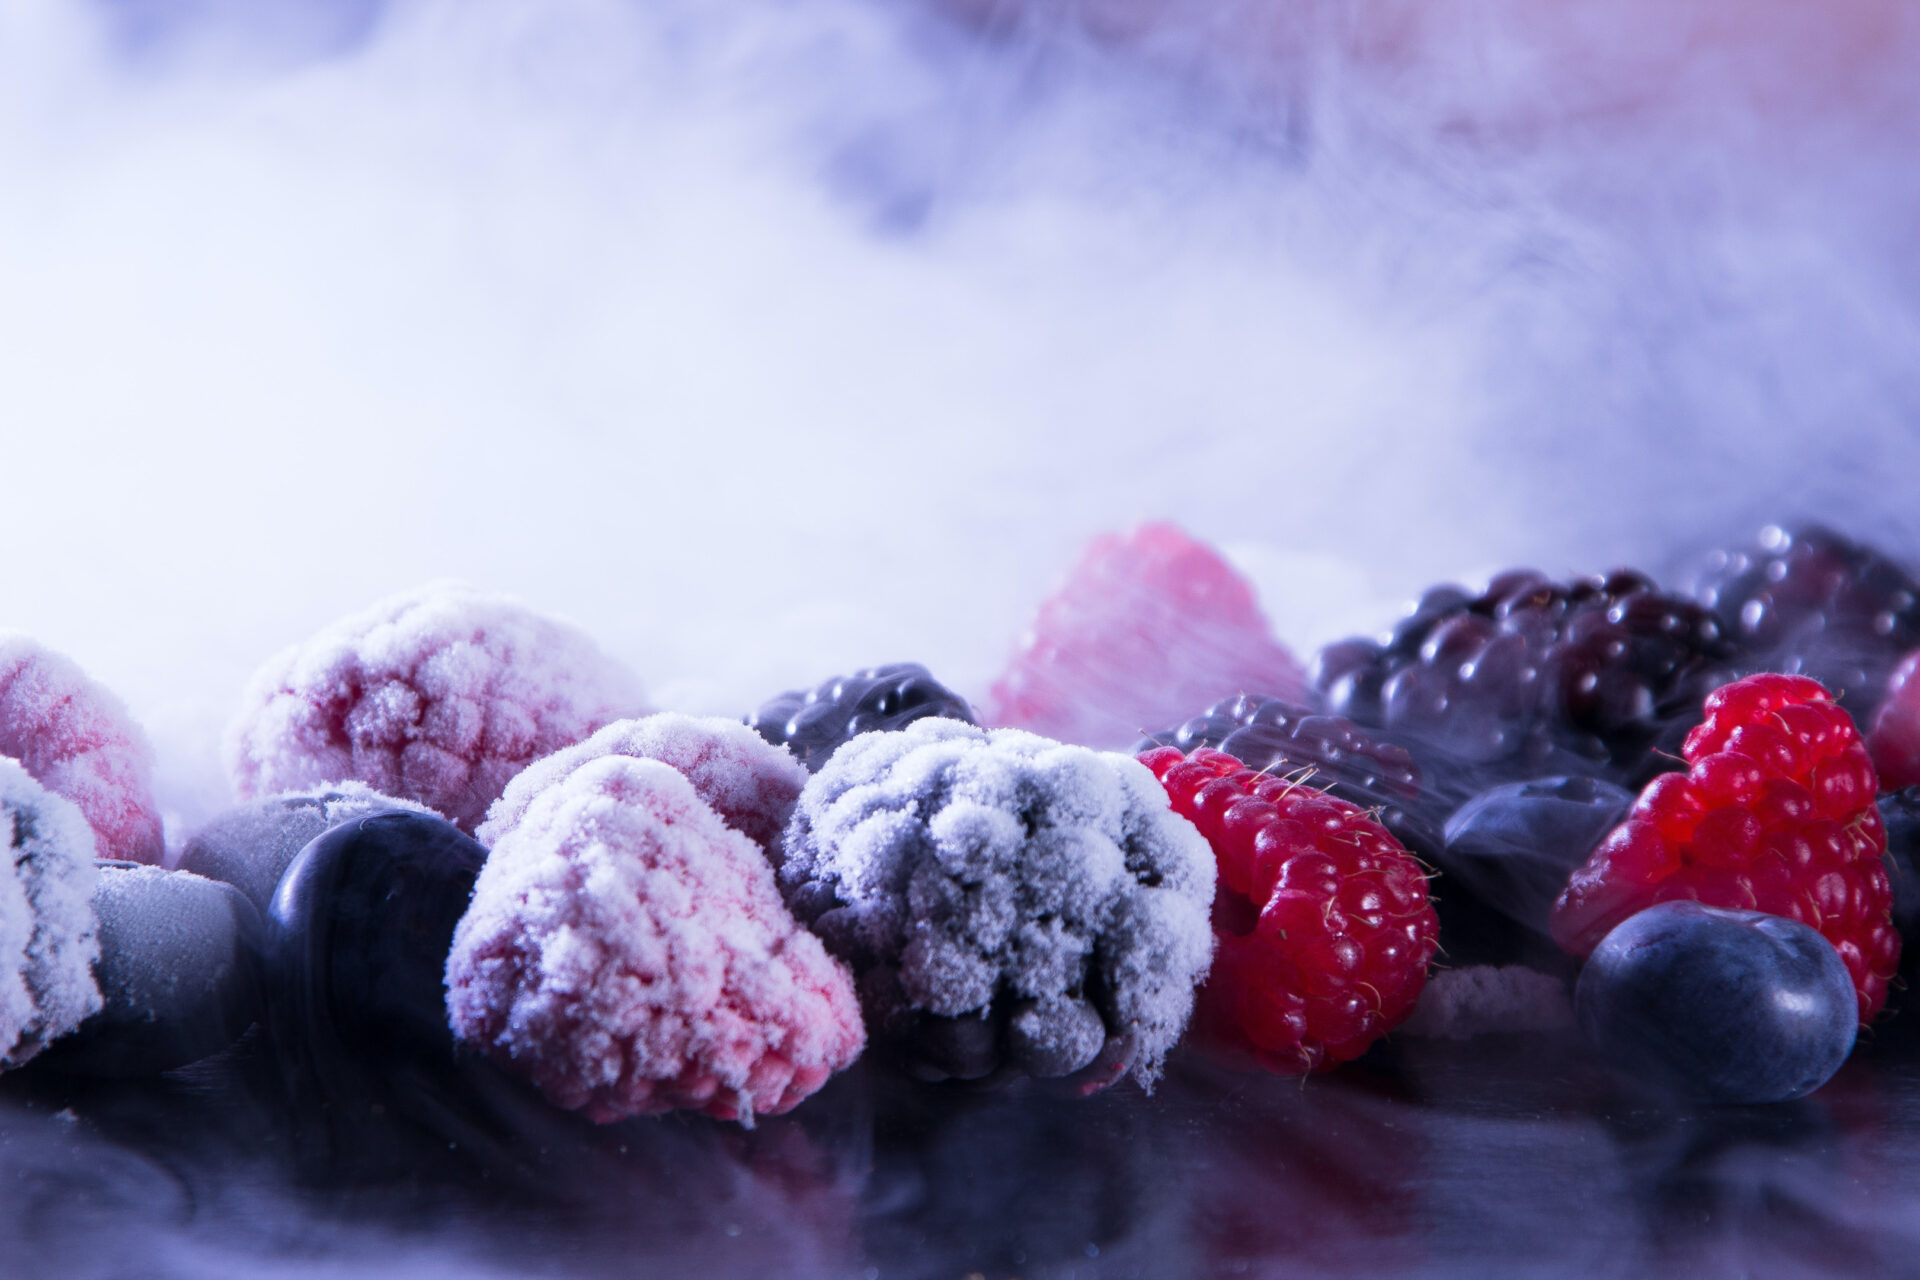 Pre-freezing berries prior to freeze-drying streamlines the process and saves time.